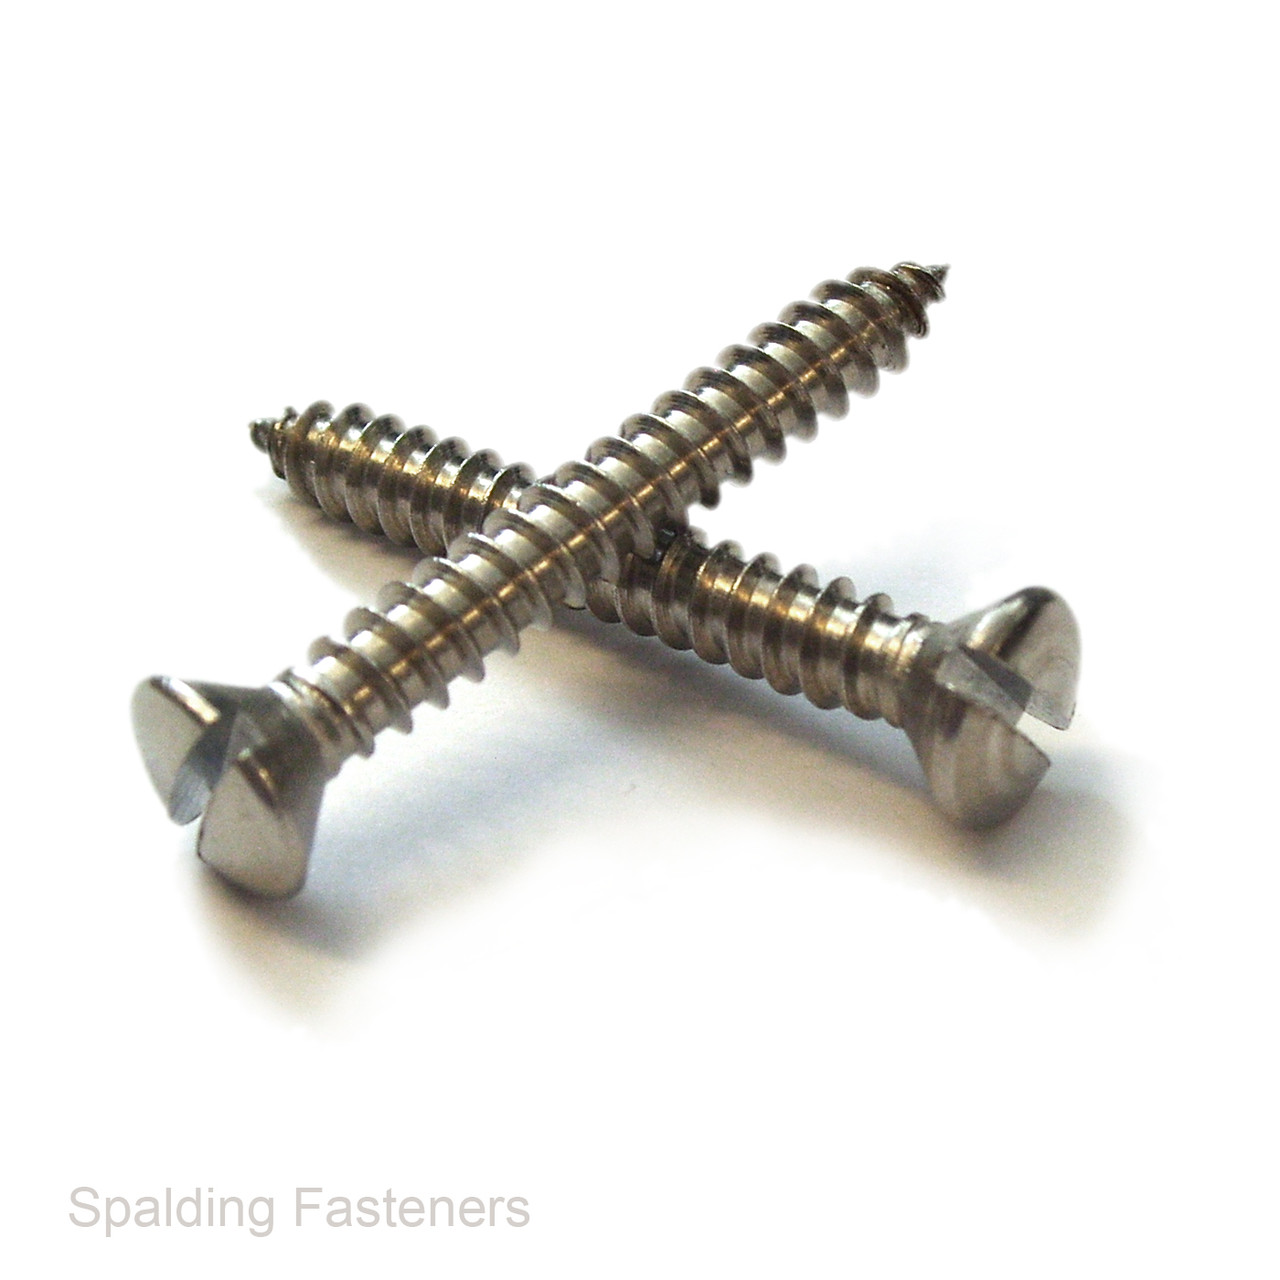 No.6 A2 Stainless Steel Raised Countersunk Slotted Head Self Tapping Screws